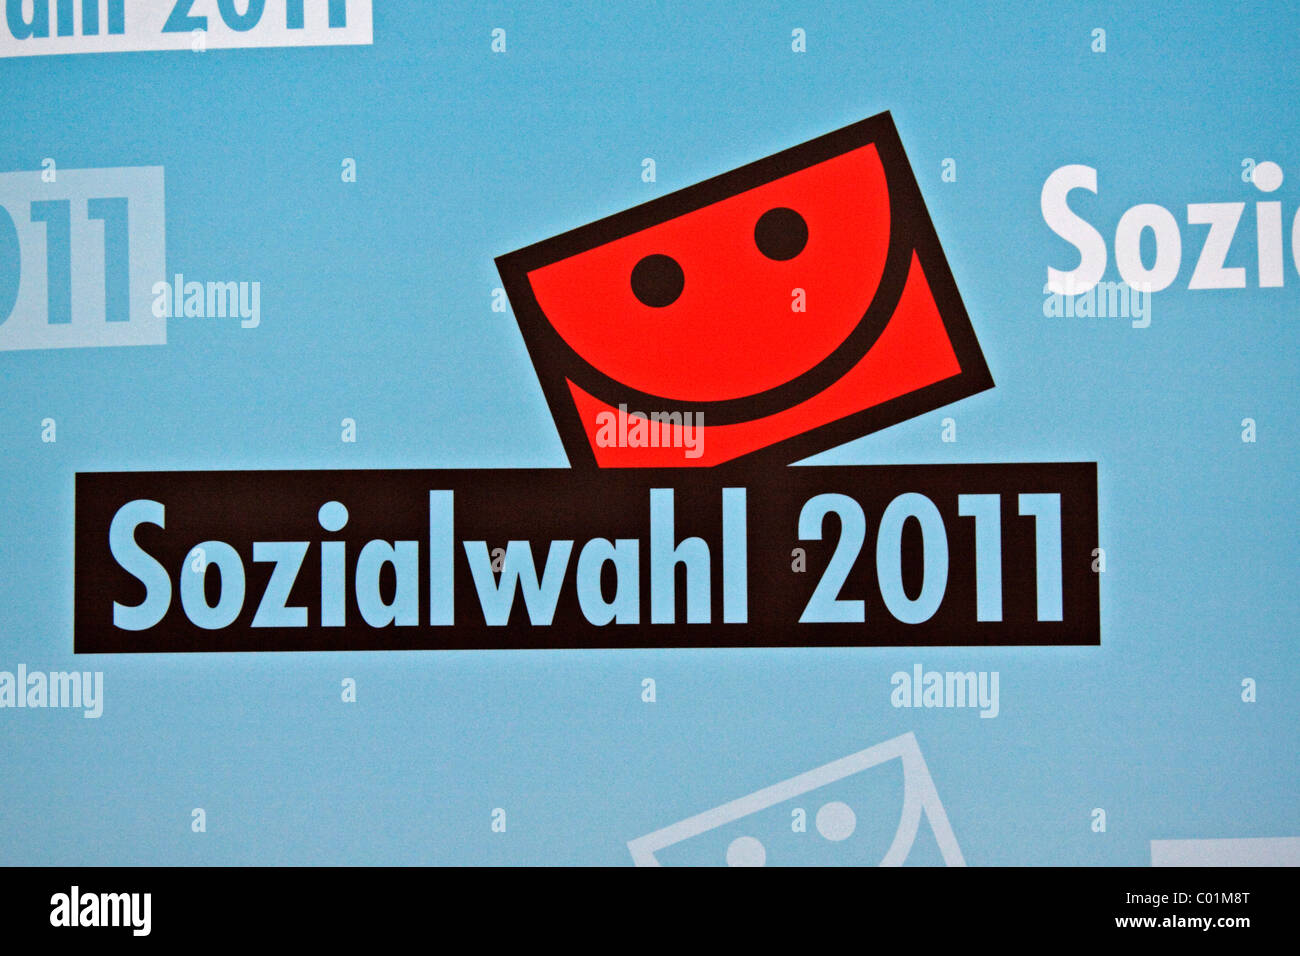 Logo and lettering 'Sozialwahl 2011', German for 'social election 2011' Stock Photo